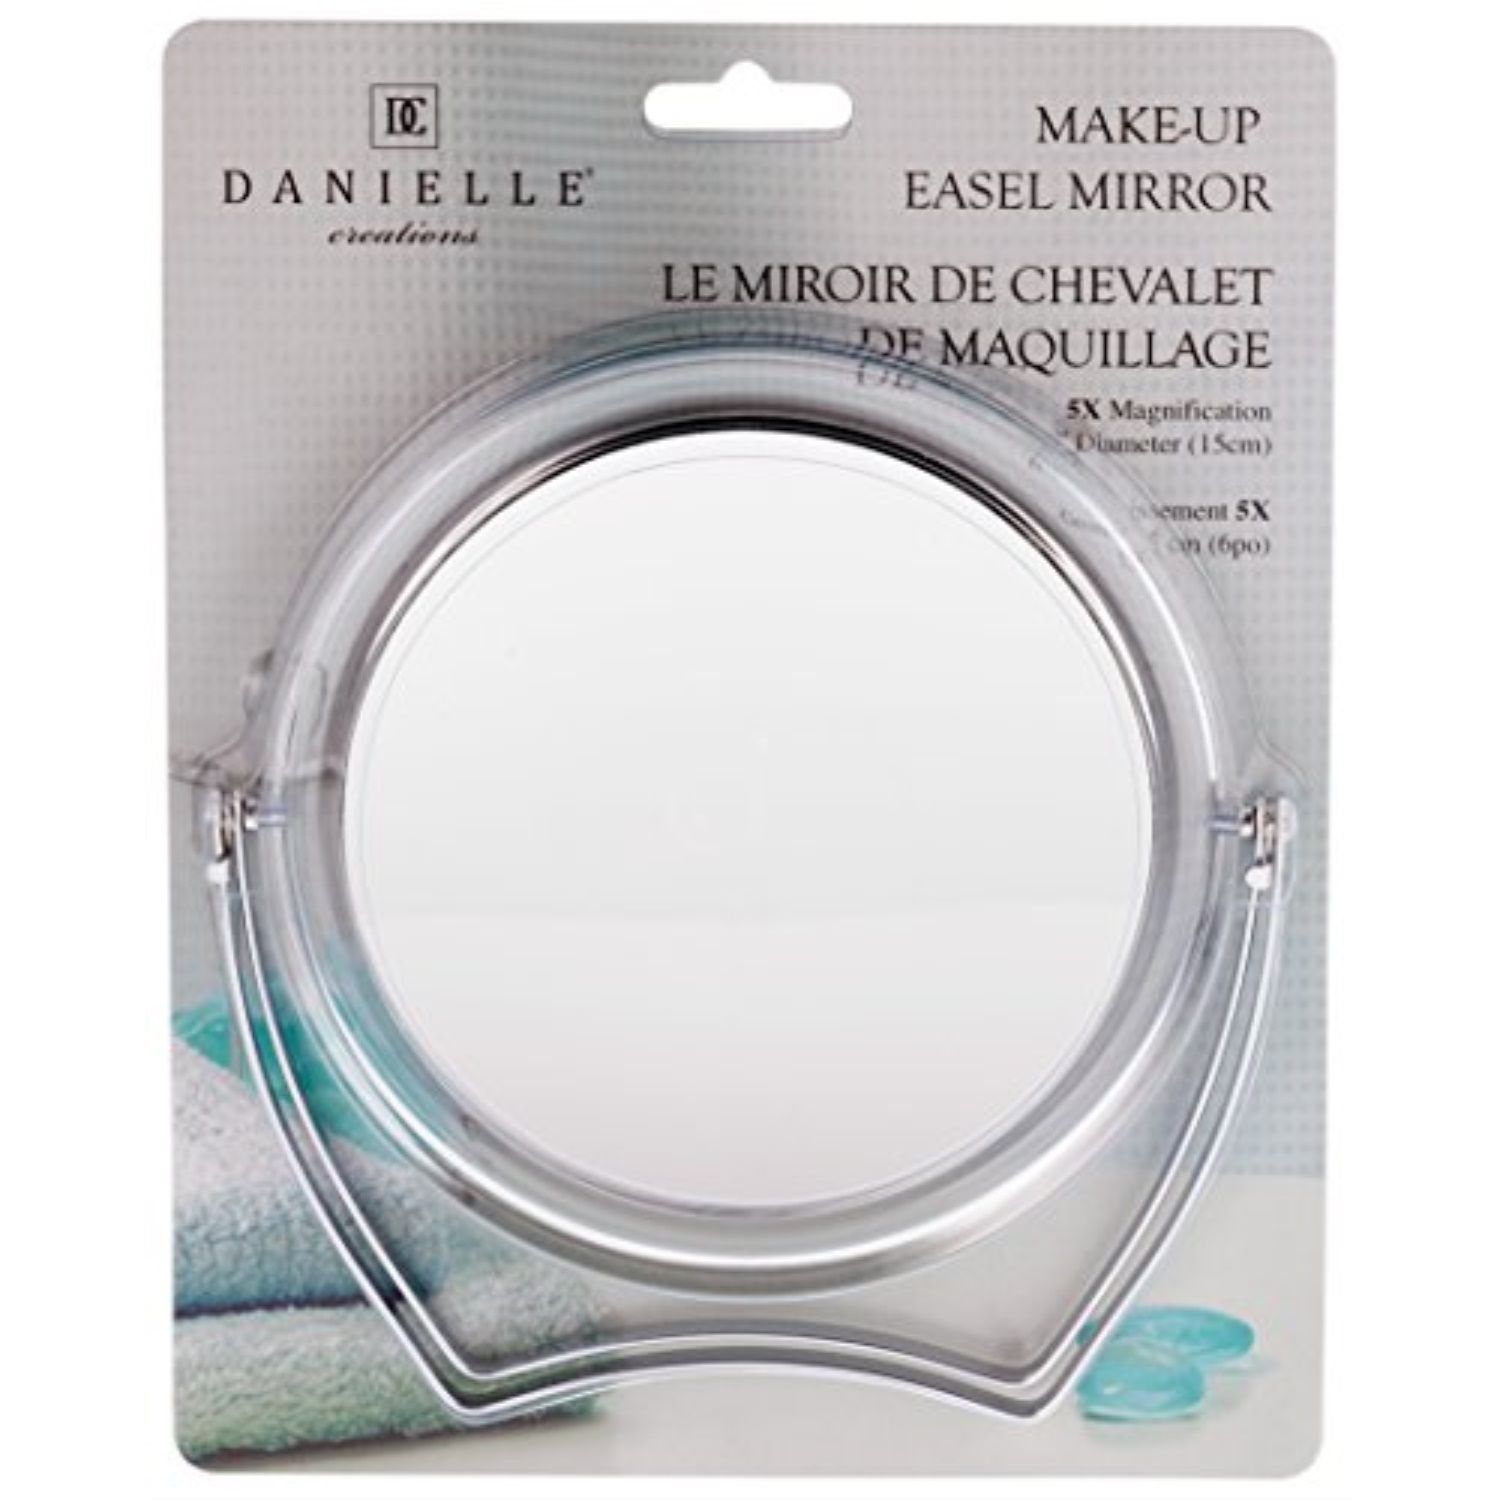 danielle creations chrome easel mirror, 5x magnification - image 1 of 2